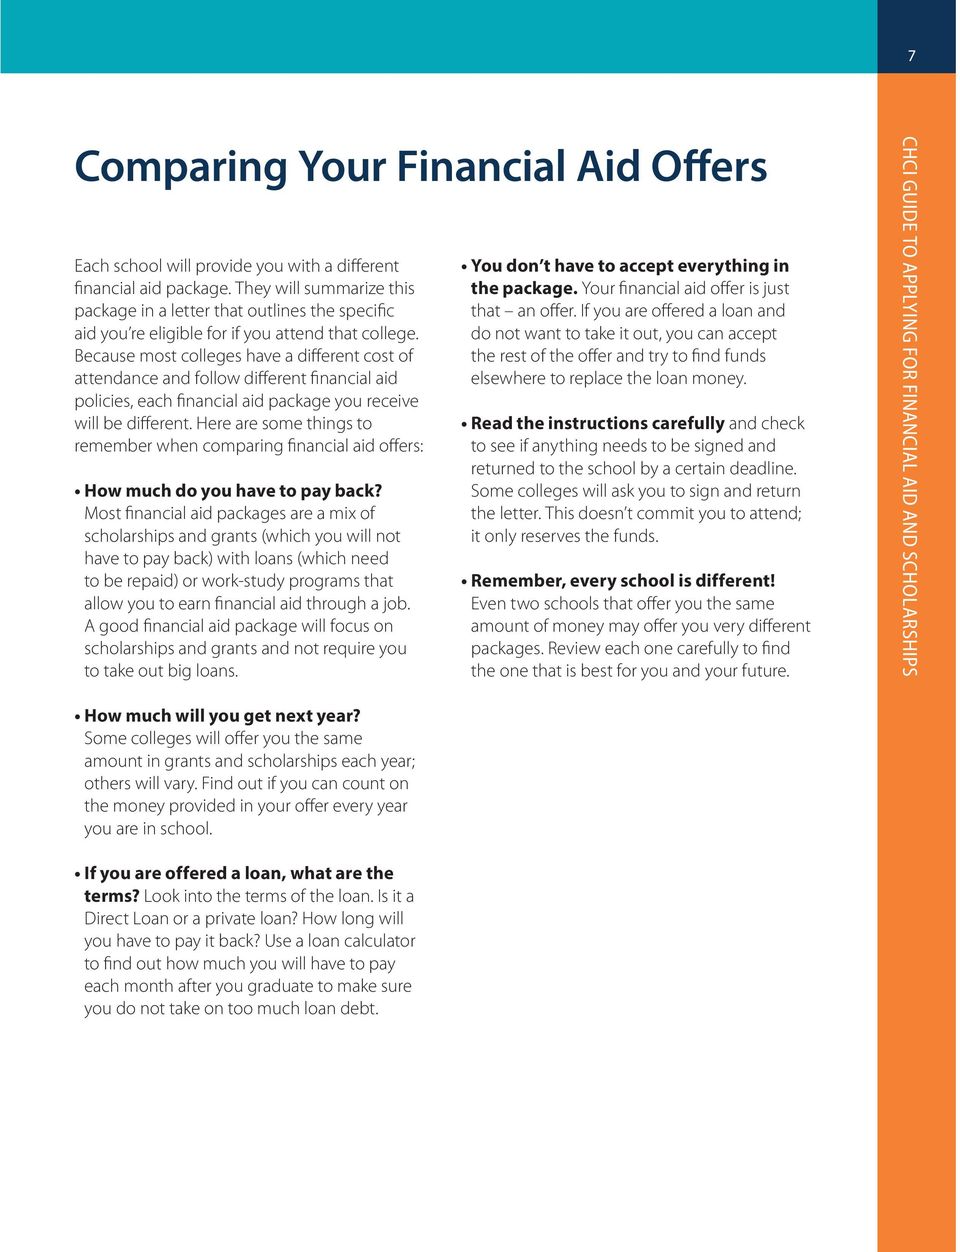 Because most colleges have a different cost of attendance and follow different financial aid policies, each financial aid package you receive will be different.